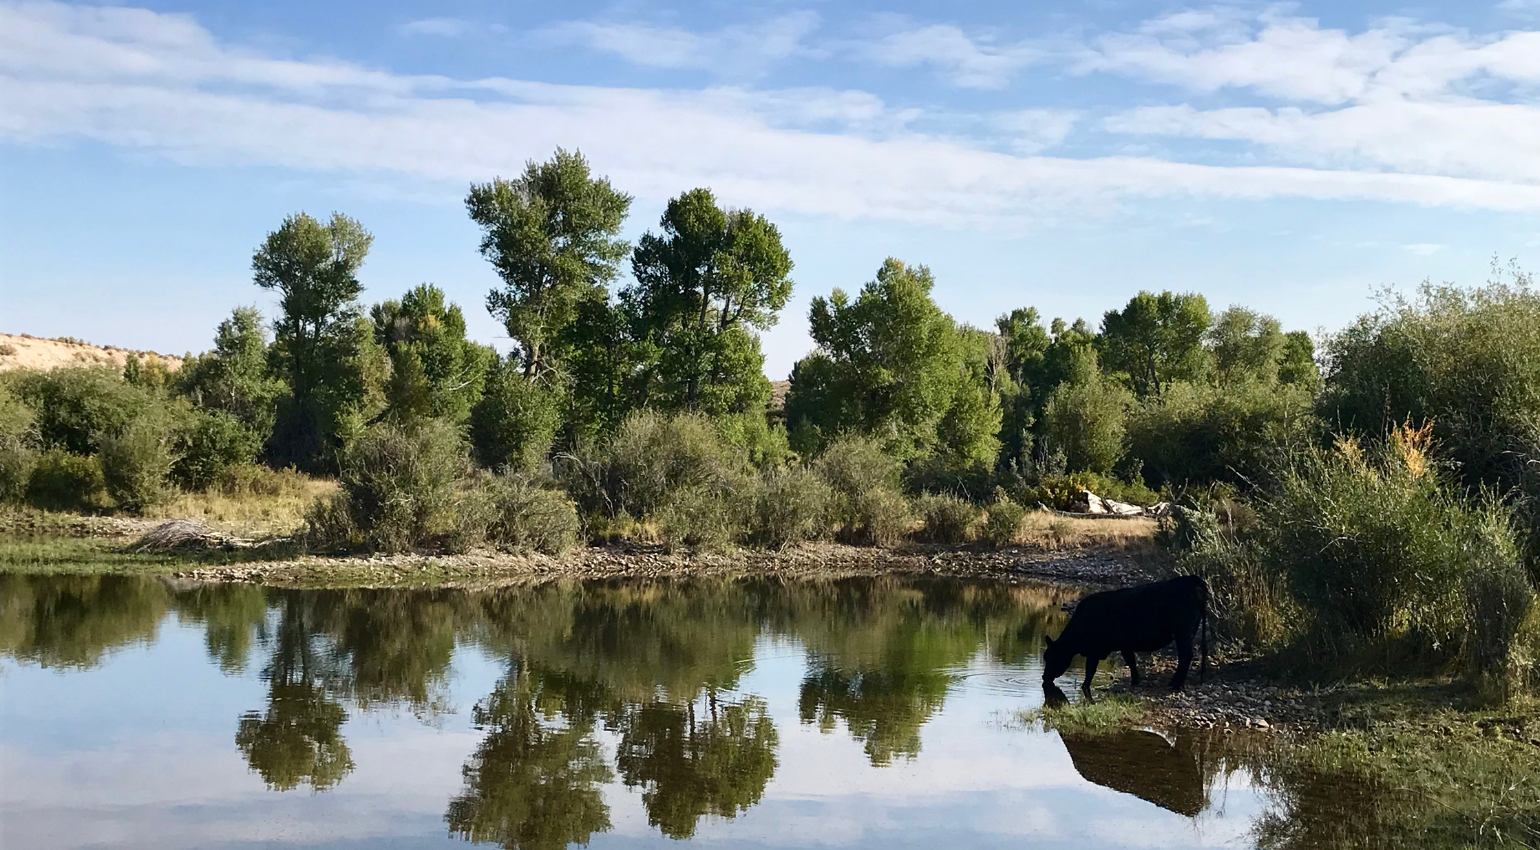 reflection of cow drinking